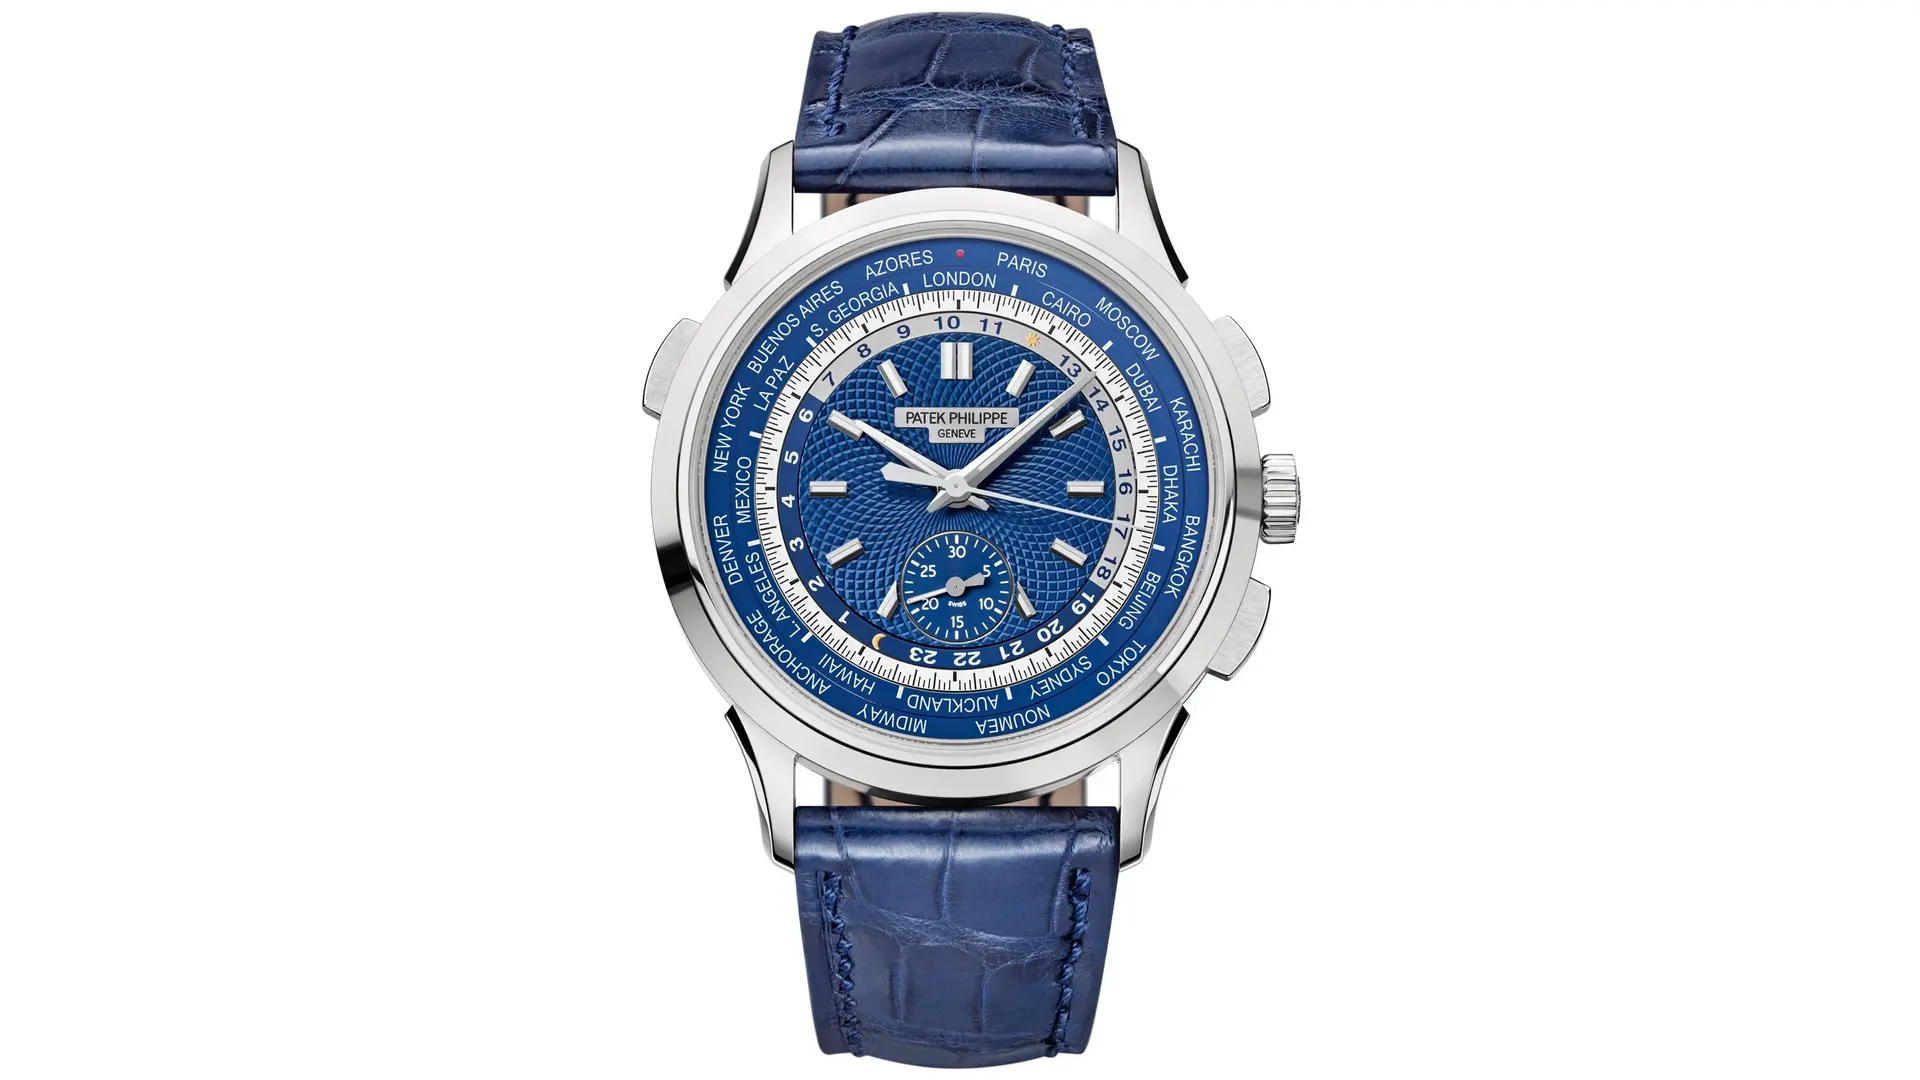 Lifestyle Articles - Ten of the Best Travel Watches - 4